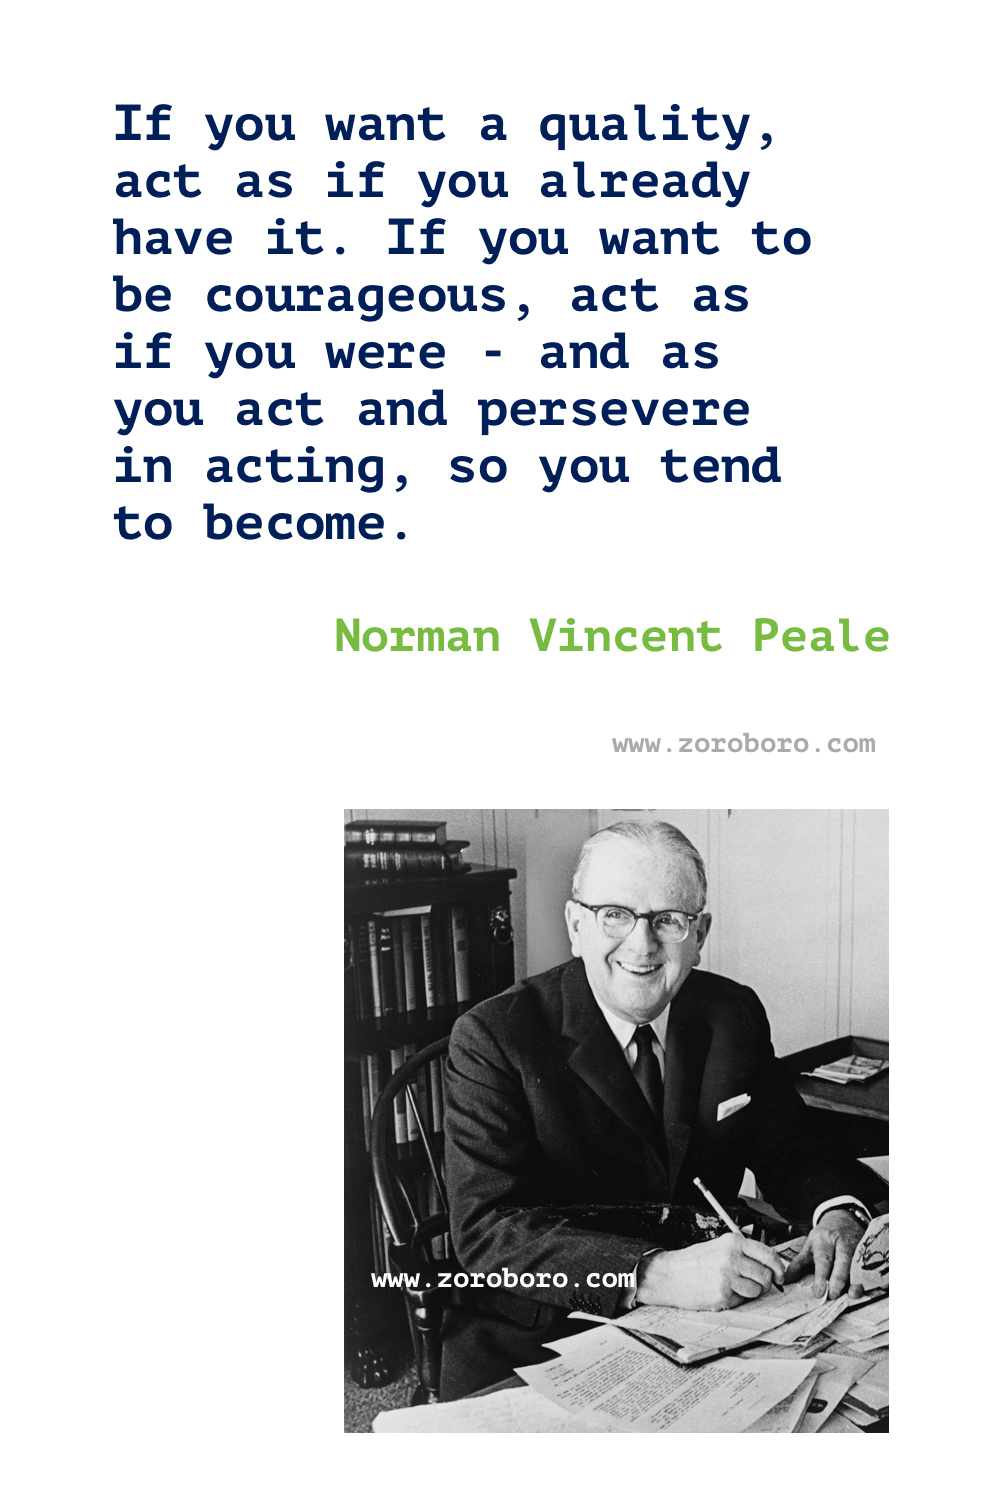 Norman Vincent Peale Quotes. The Power of Positive Thinking. Norman Vincent Peale Books Quotes. Norman Vincent Peale Inspirational Quotes. Norman Vincent Peale Attitude Quotes, Norman Vincent Peale Enthusiasm Quotes, Giving Quotes, Norman Vincent Peale Motivational Quotes, Norman Vincent Peale Positive Quotes.